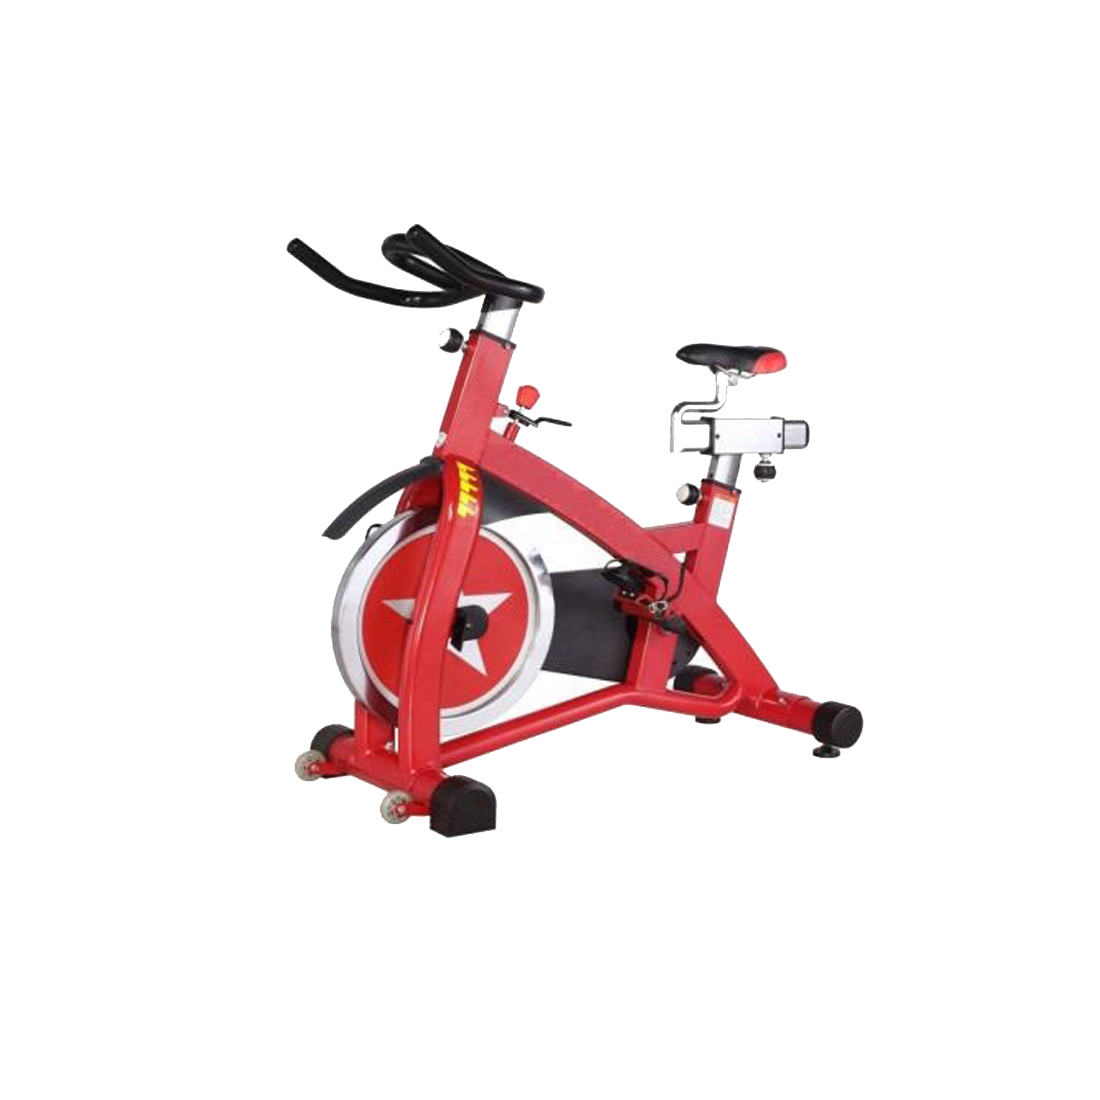 Simple Where Can I Purchase An Exercise Bike for Weight Loss